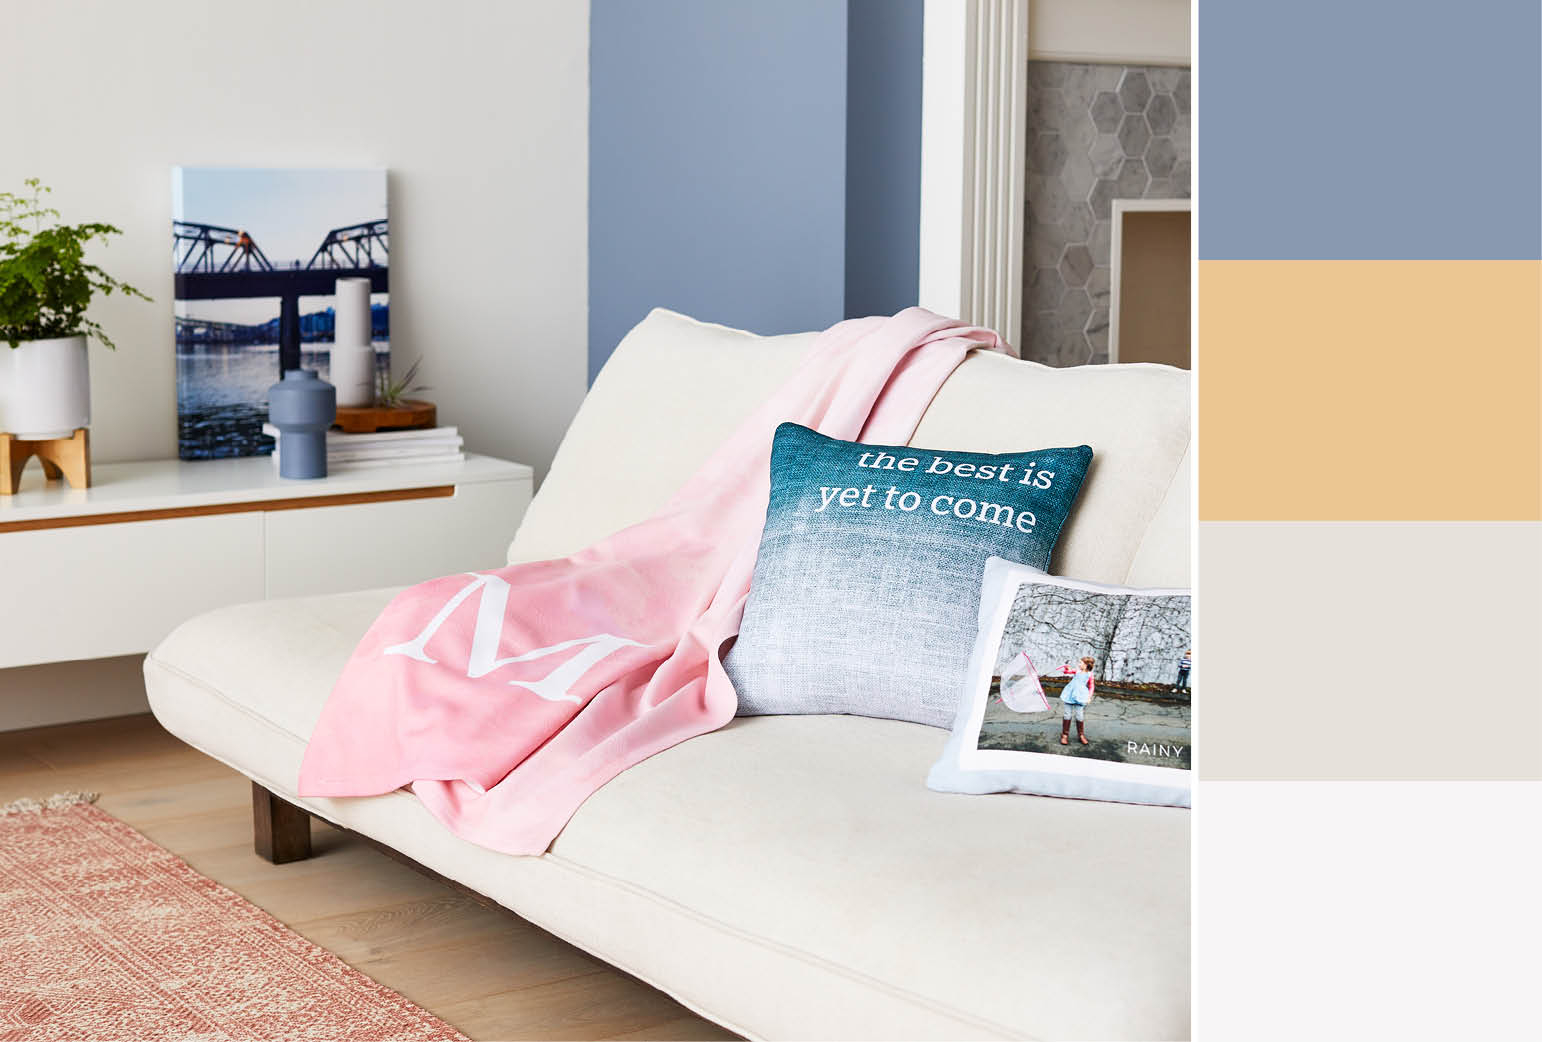 30 Accent Wall Color Combinations To Match Any Style Shutterfly pertaining to size 1542 X 1042